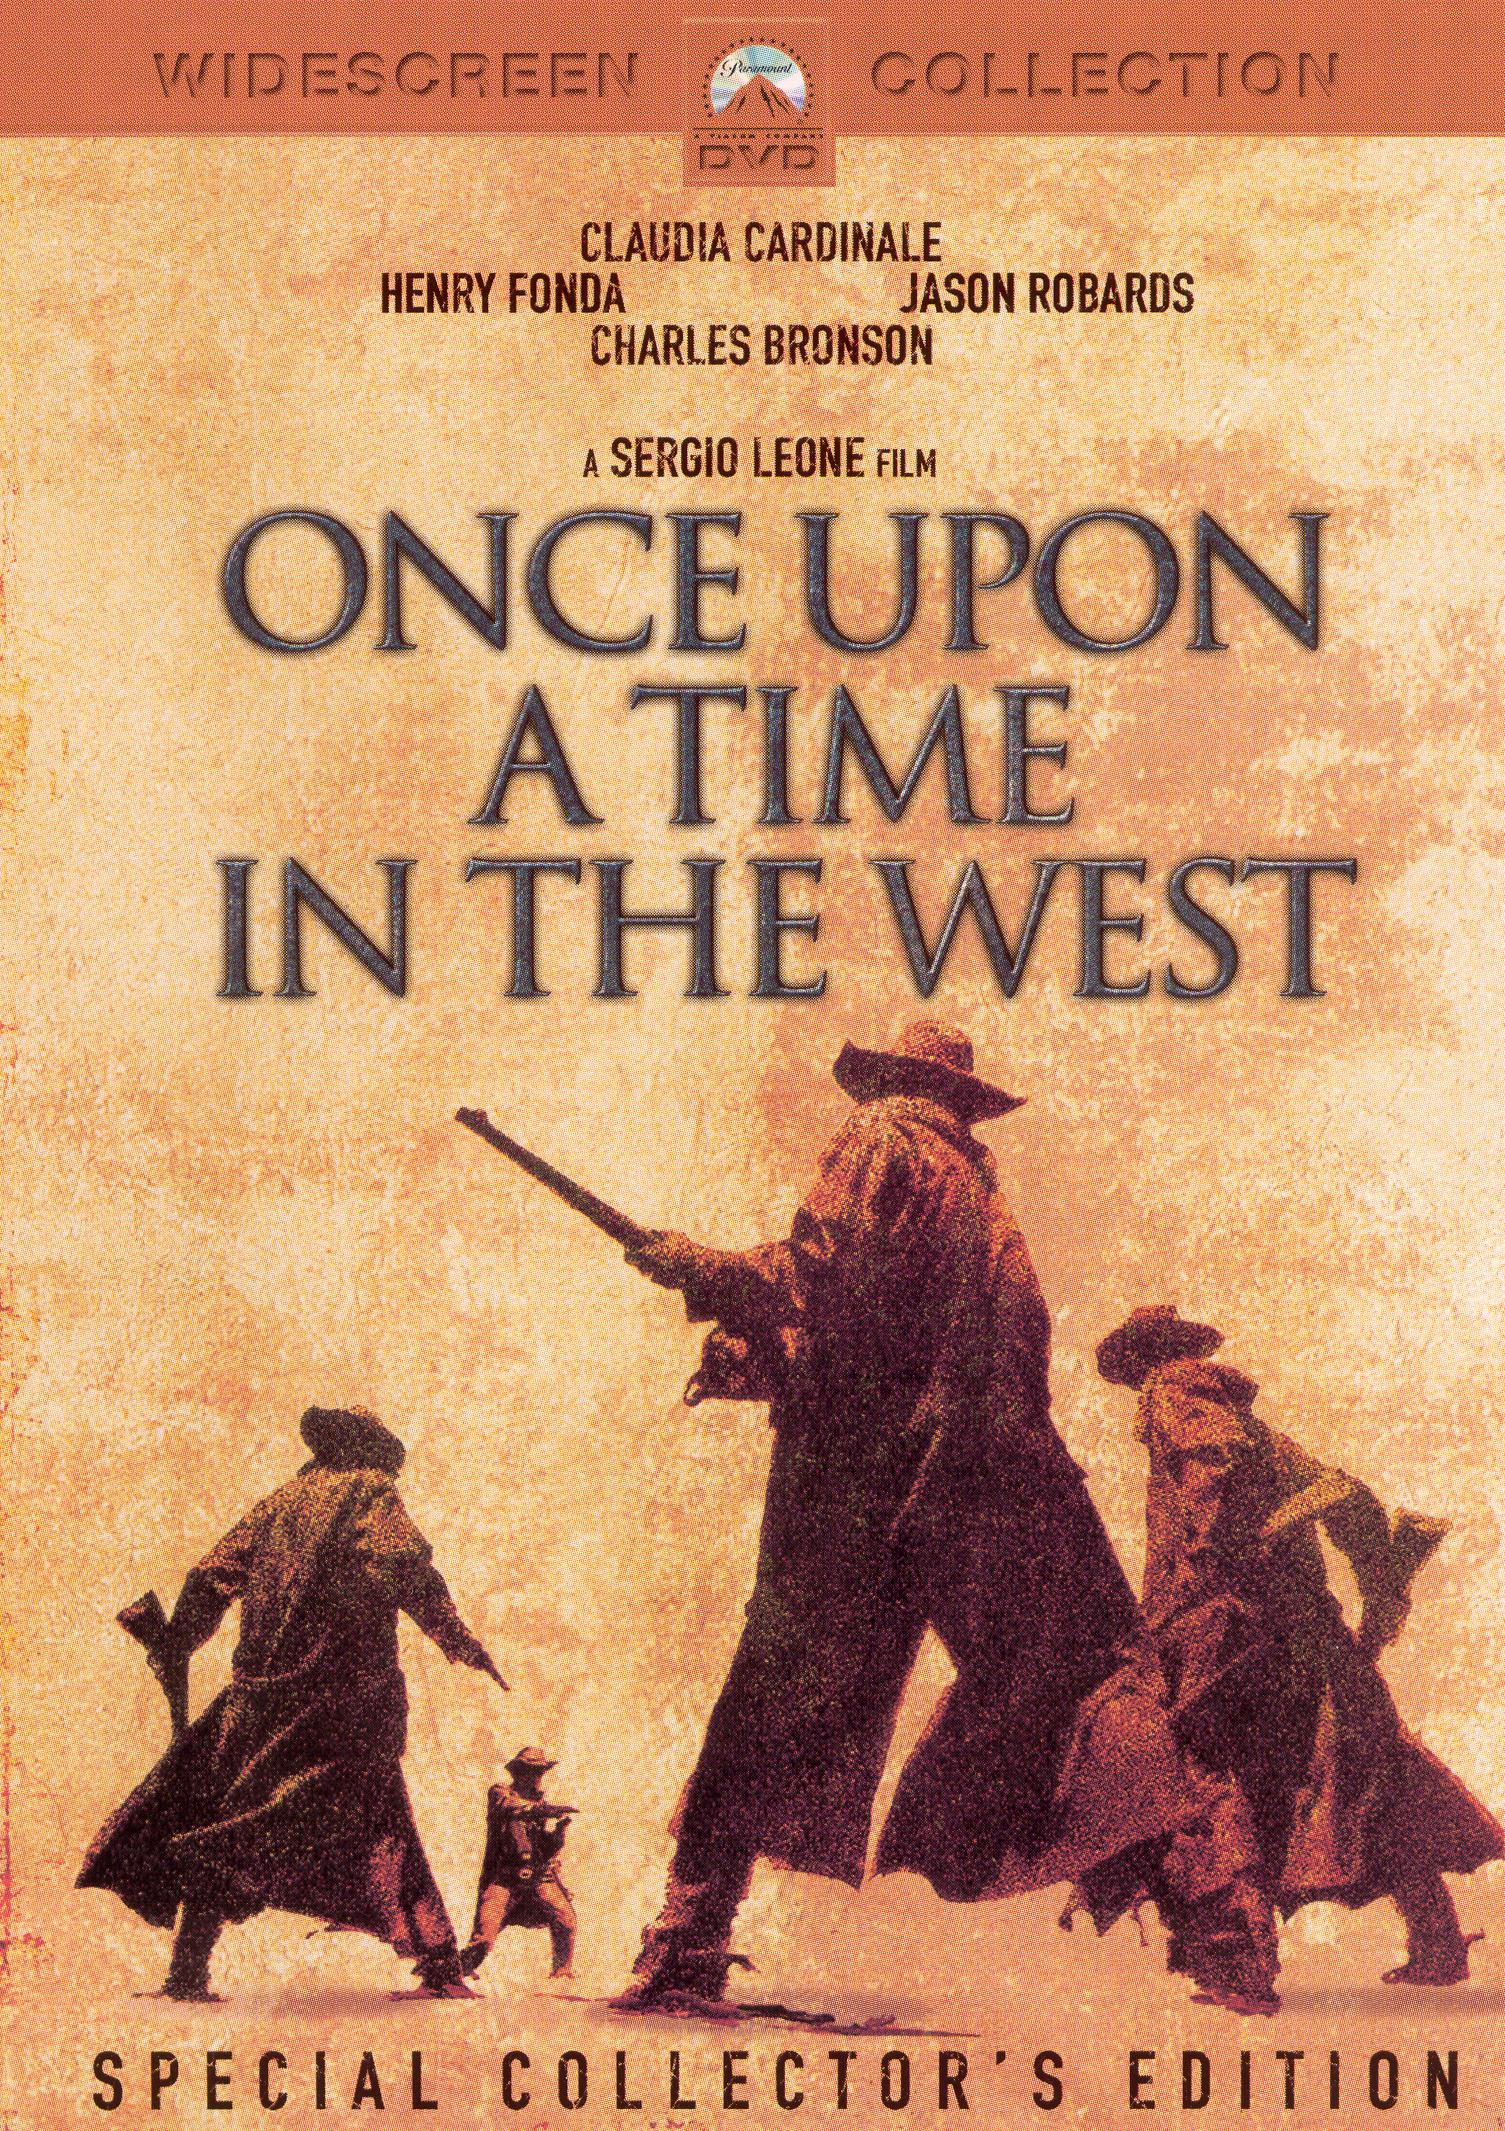  Once Upon a Time in the West [2 Discs] [DVD] [1968]